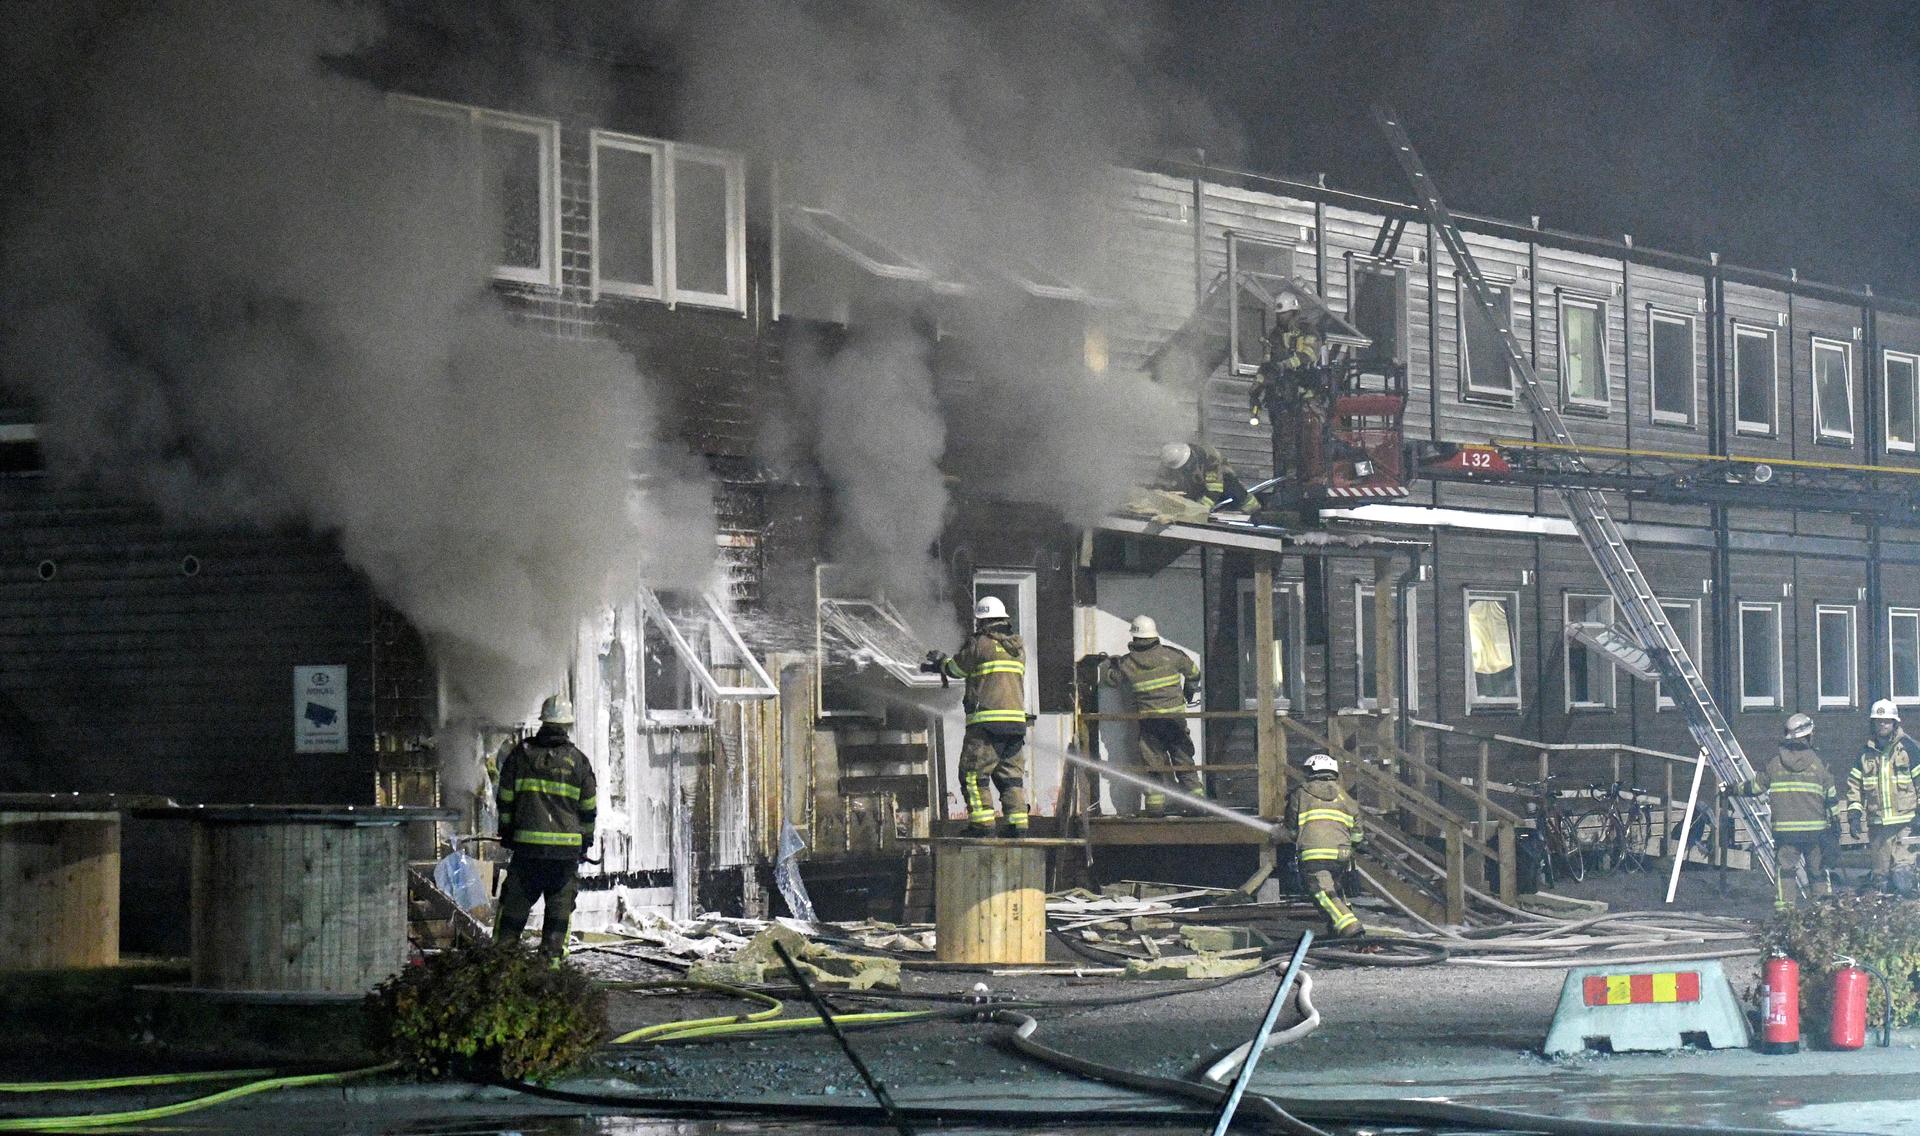 Firefighters extinguish a fire that broke out at a refugee center in Fagersjo, south of Stockholm, Sweden on the night of Oct. 16, 2016. Police suspected arson was the cause.